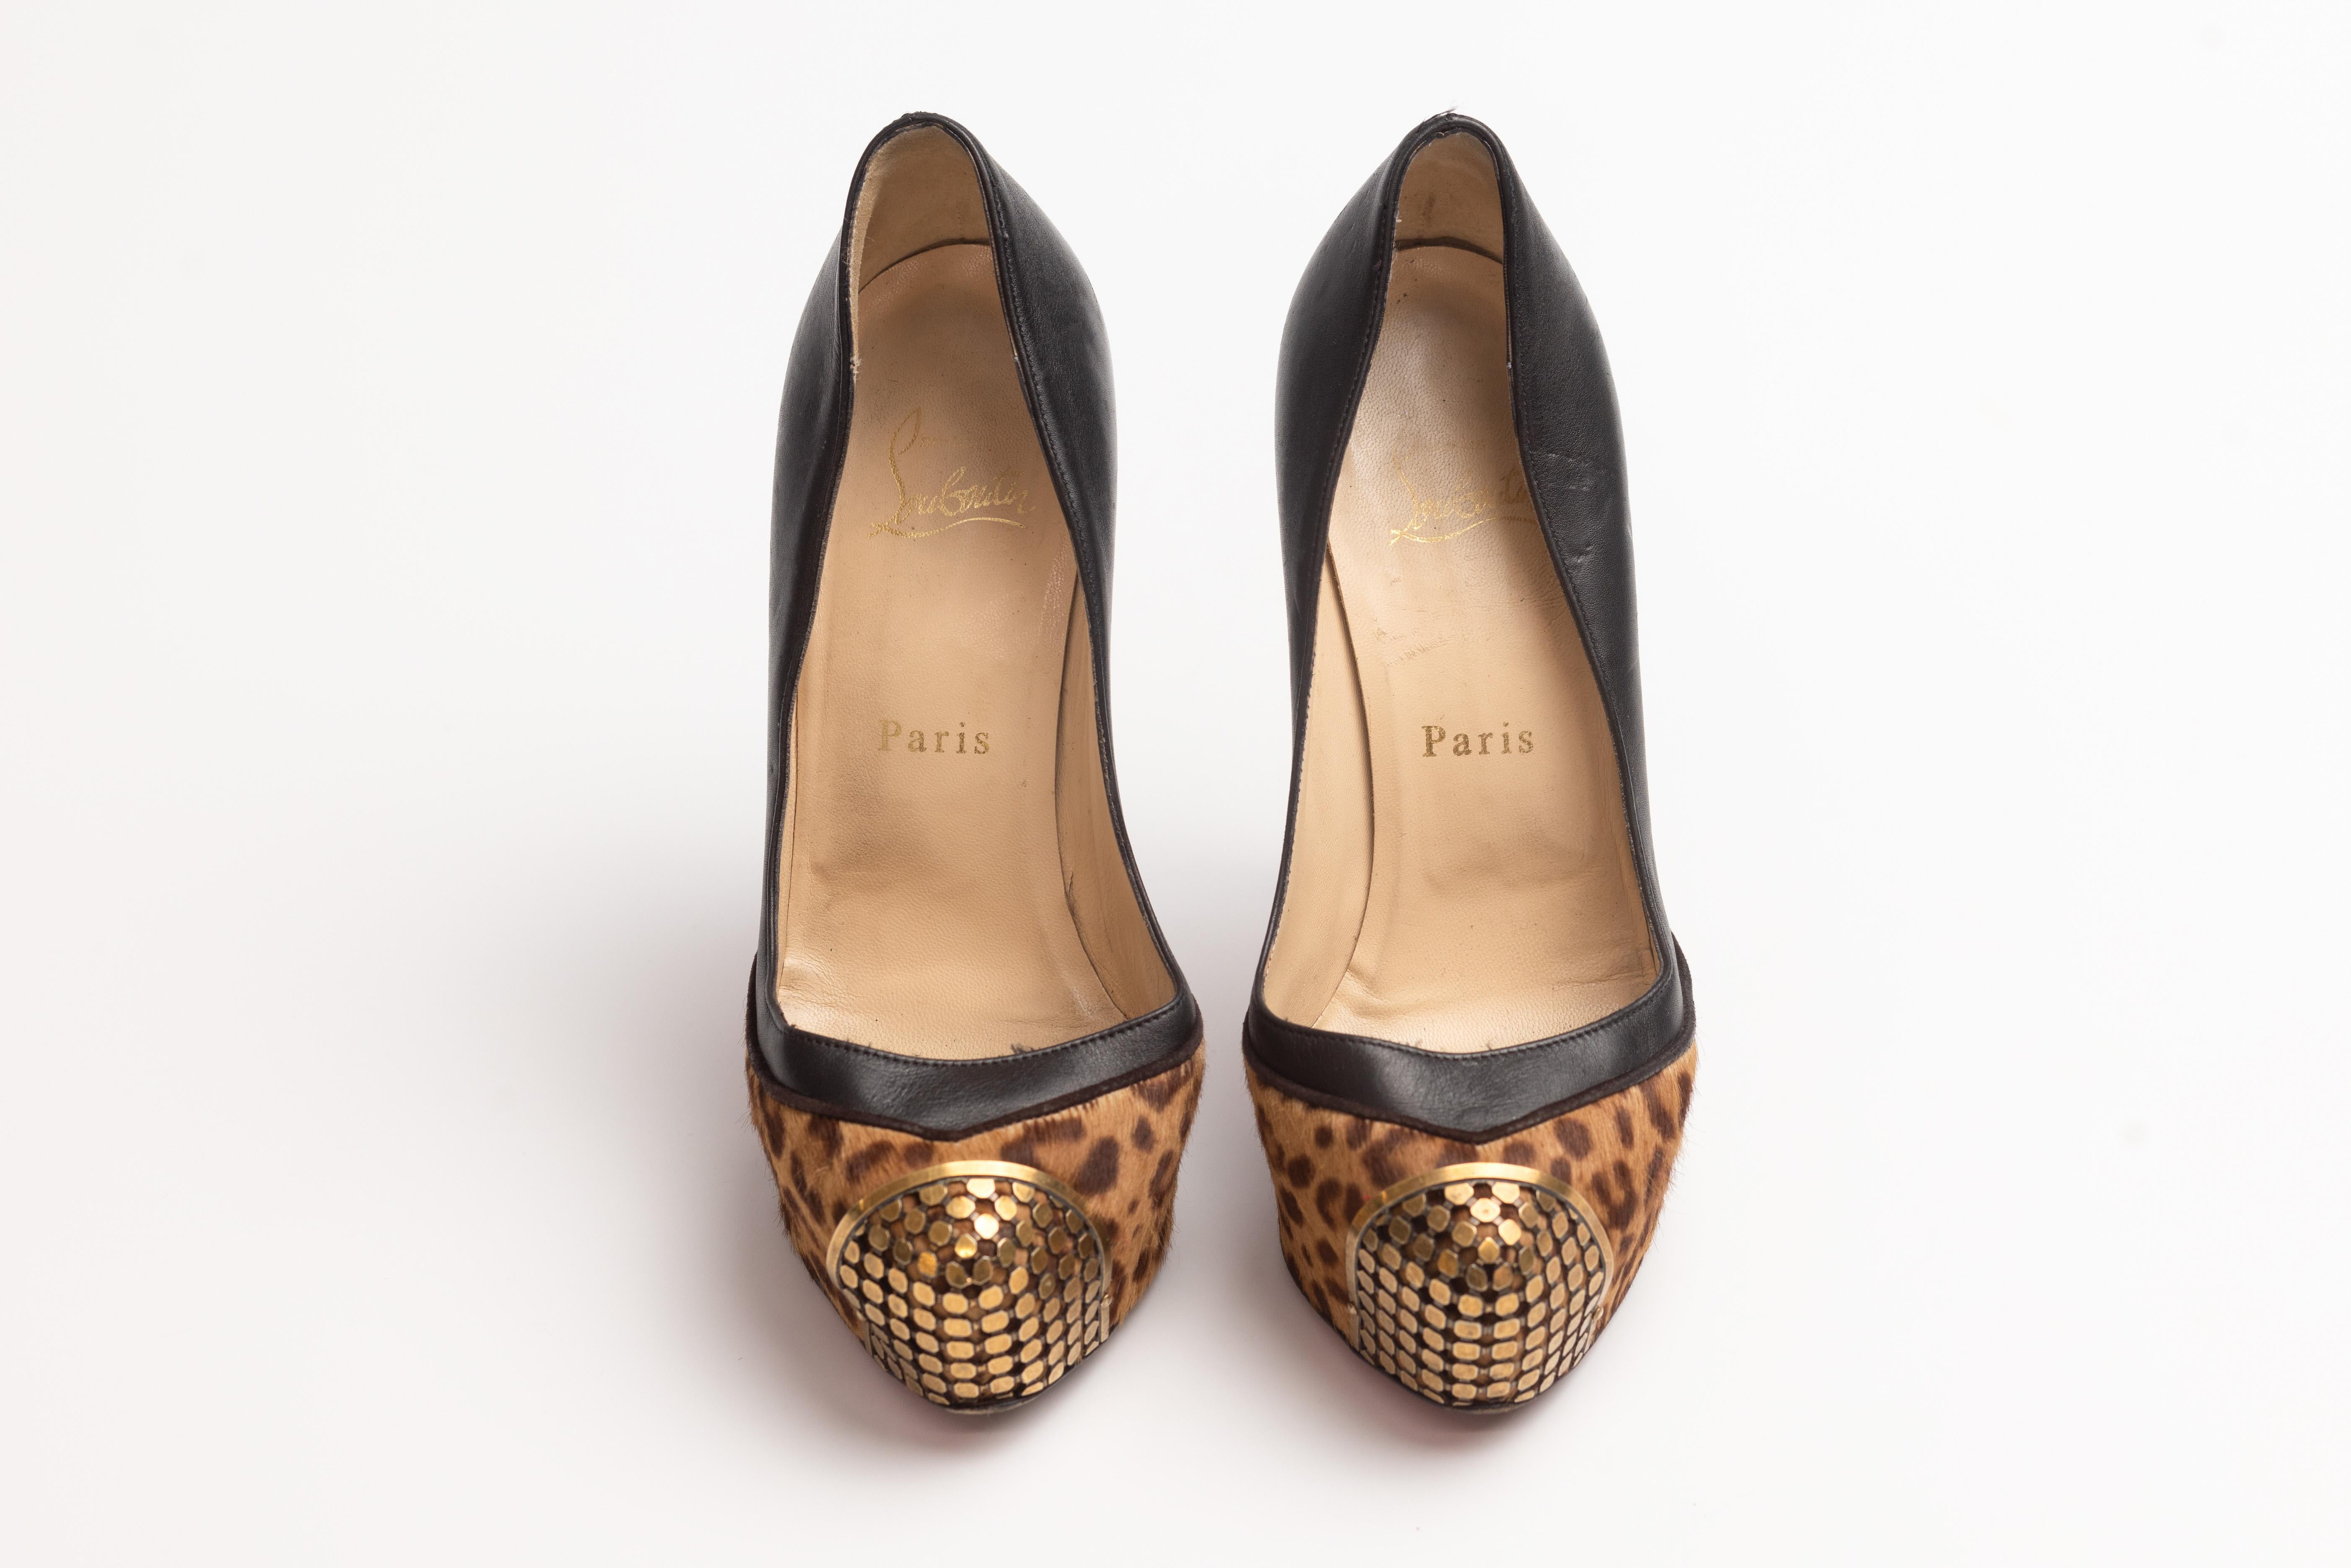 Christian Louboutin Leopard Print Pony Hair Maggie Pumps (EU 35.5) In Good Condition For Sale In Montreal, Quebec